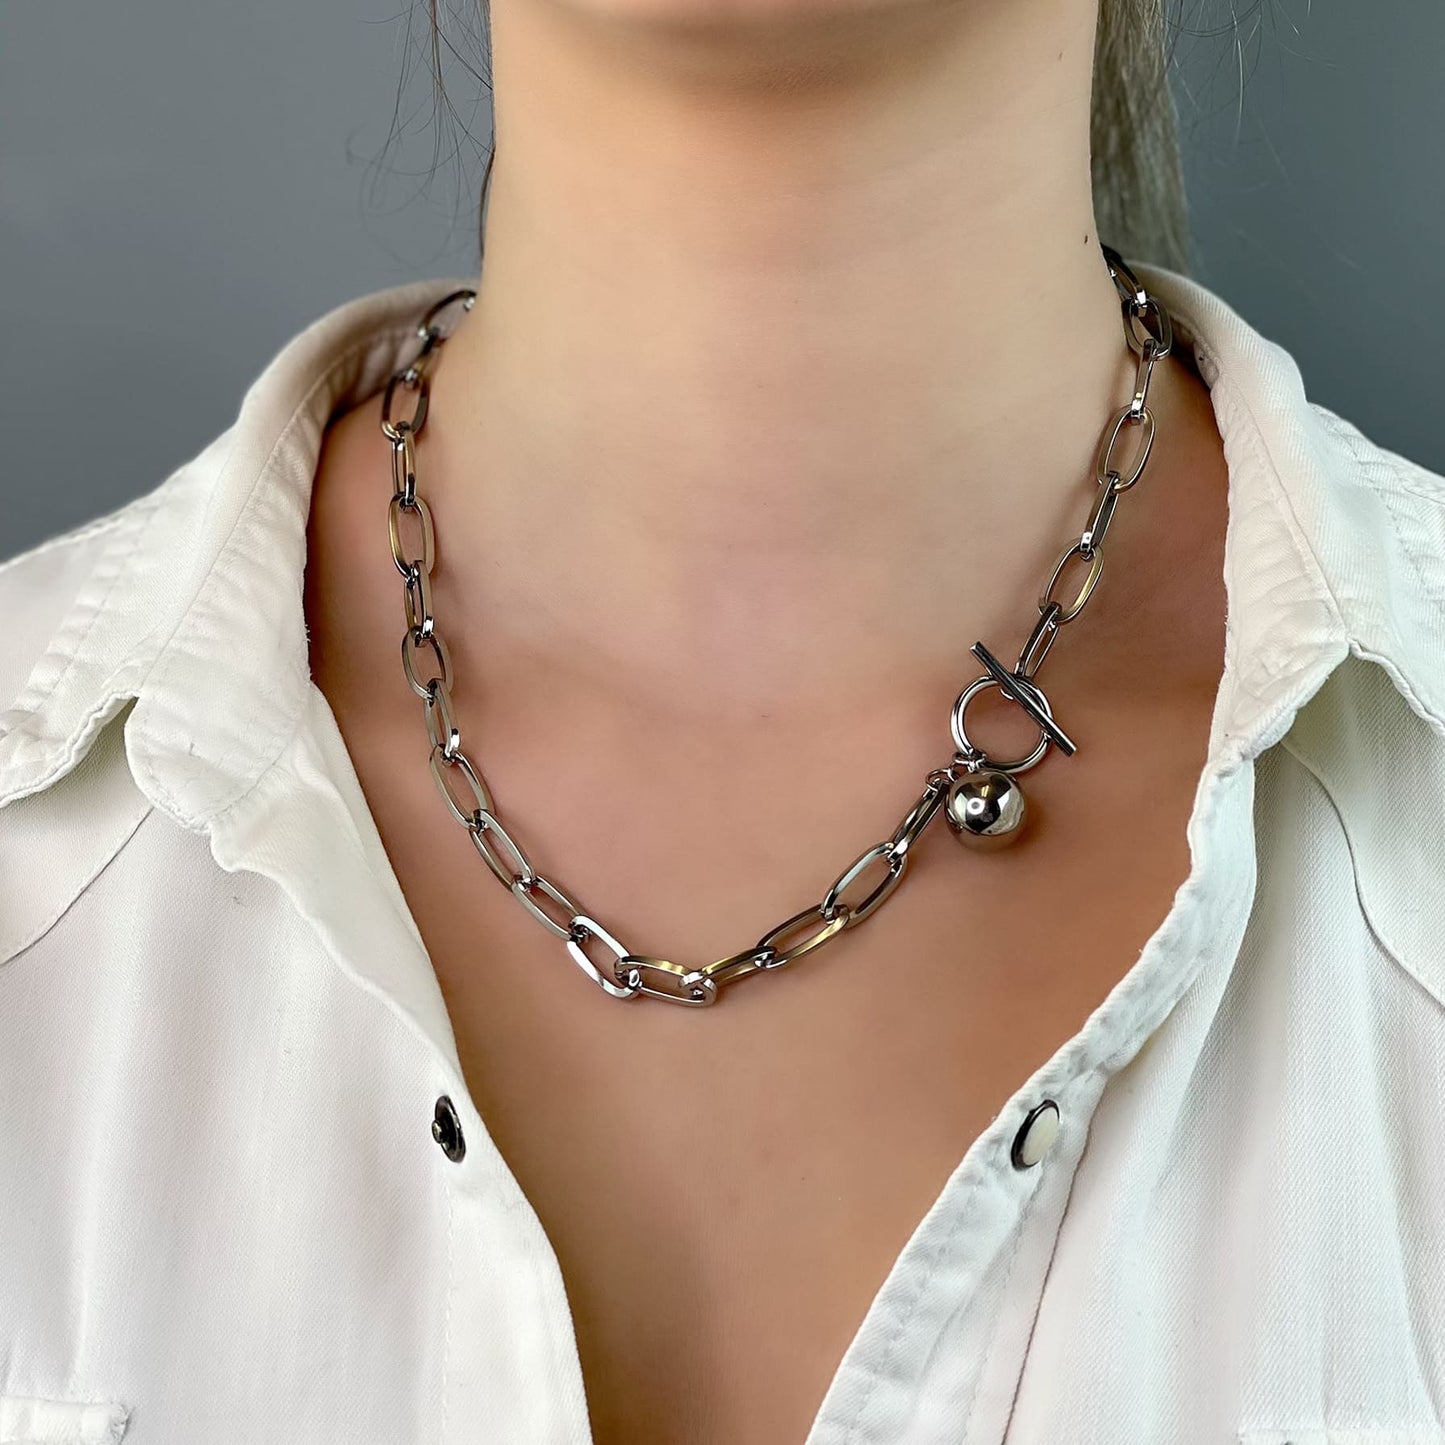 Hellen.V - Chain with Ball Pendant | Silver Necklace